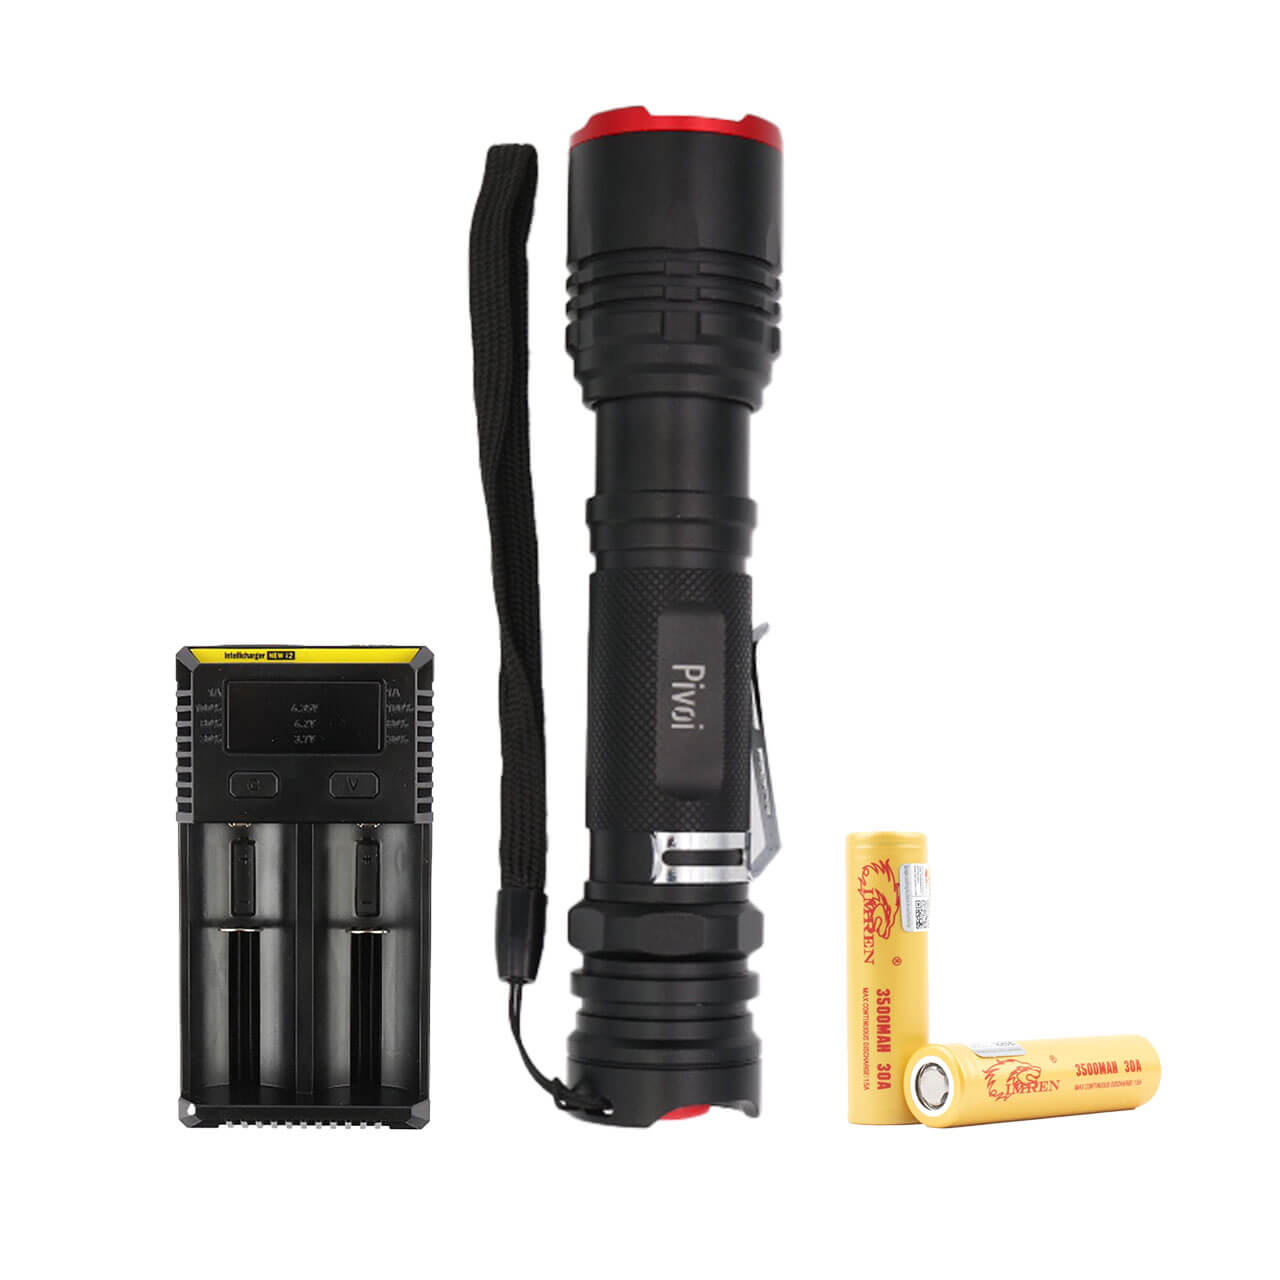 15W Water Resistant Flashlight with NiteCore I2 IntellCharger and 2 x 18650 Battery